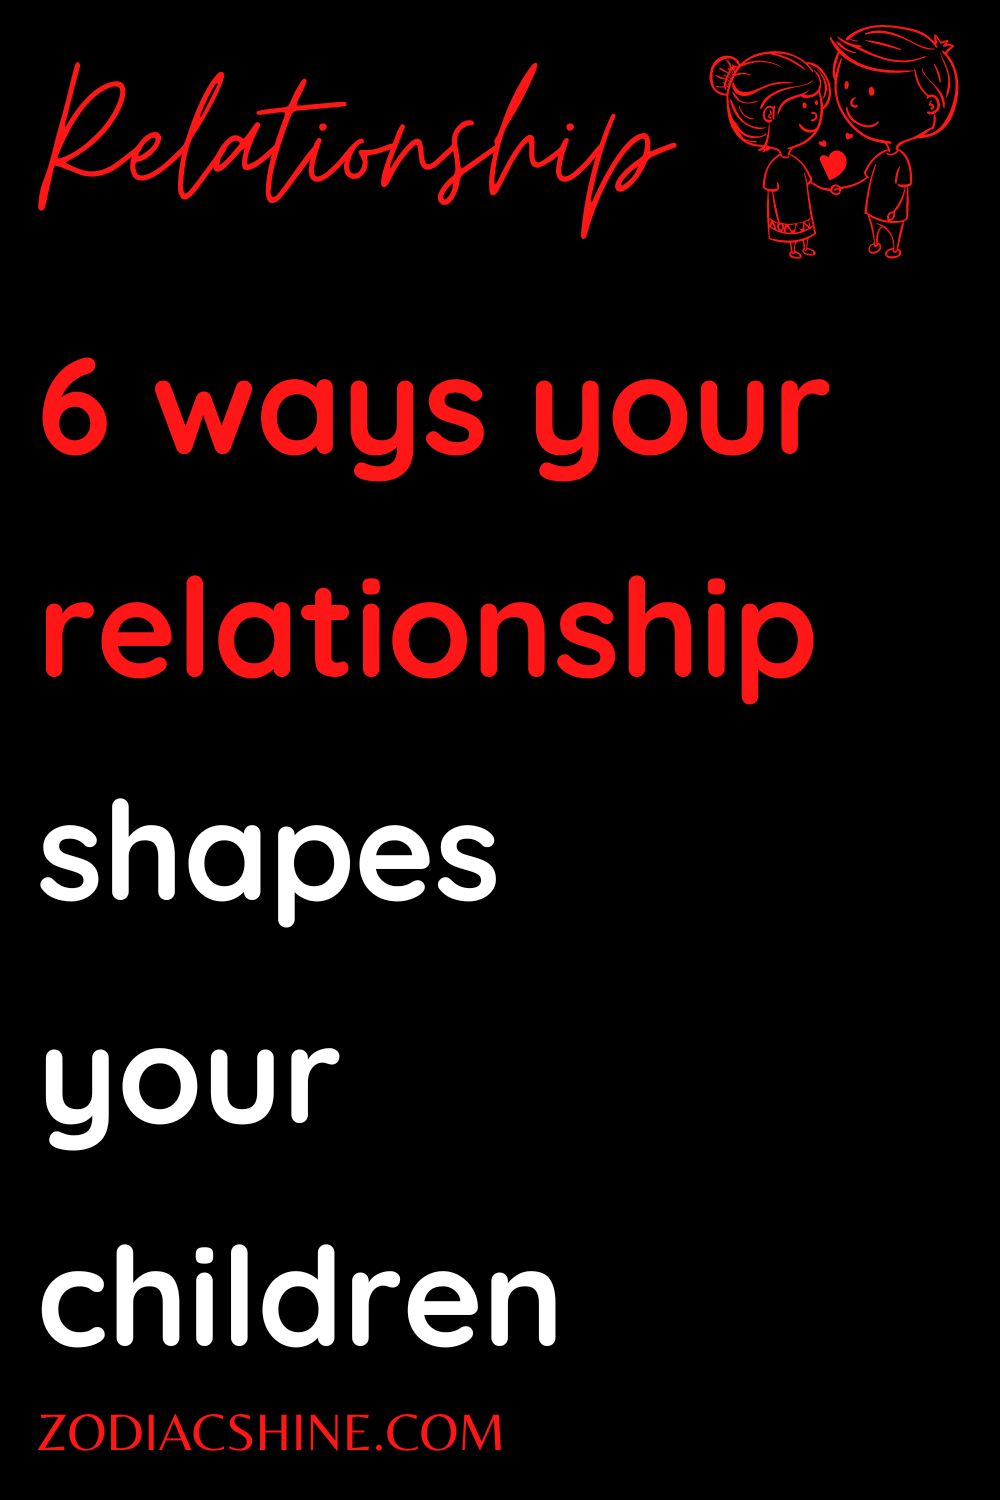 6 ways your relationship shapes your children